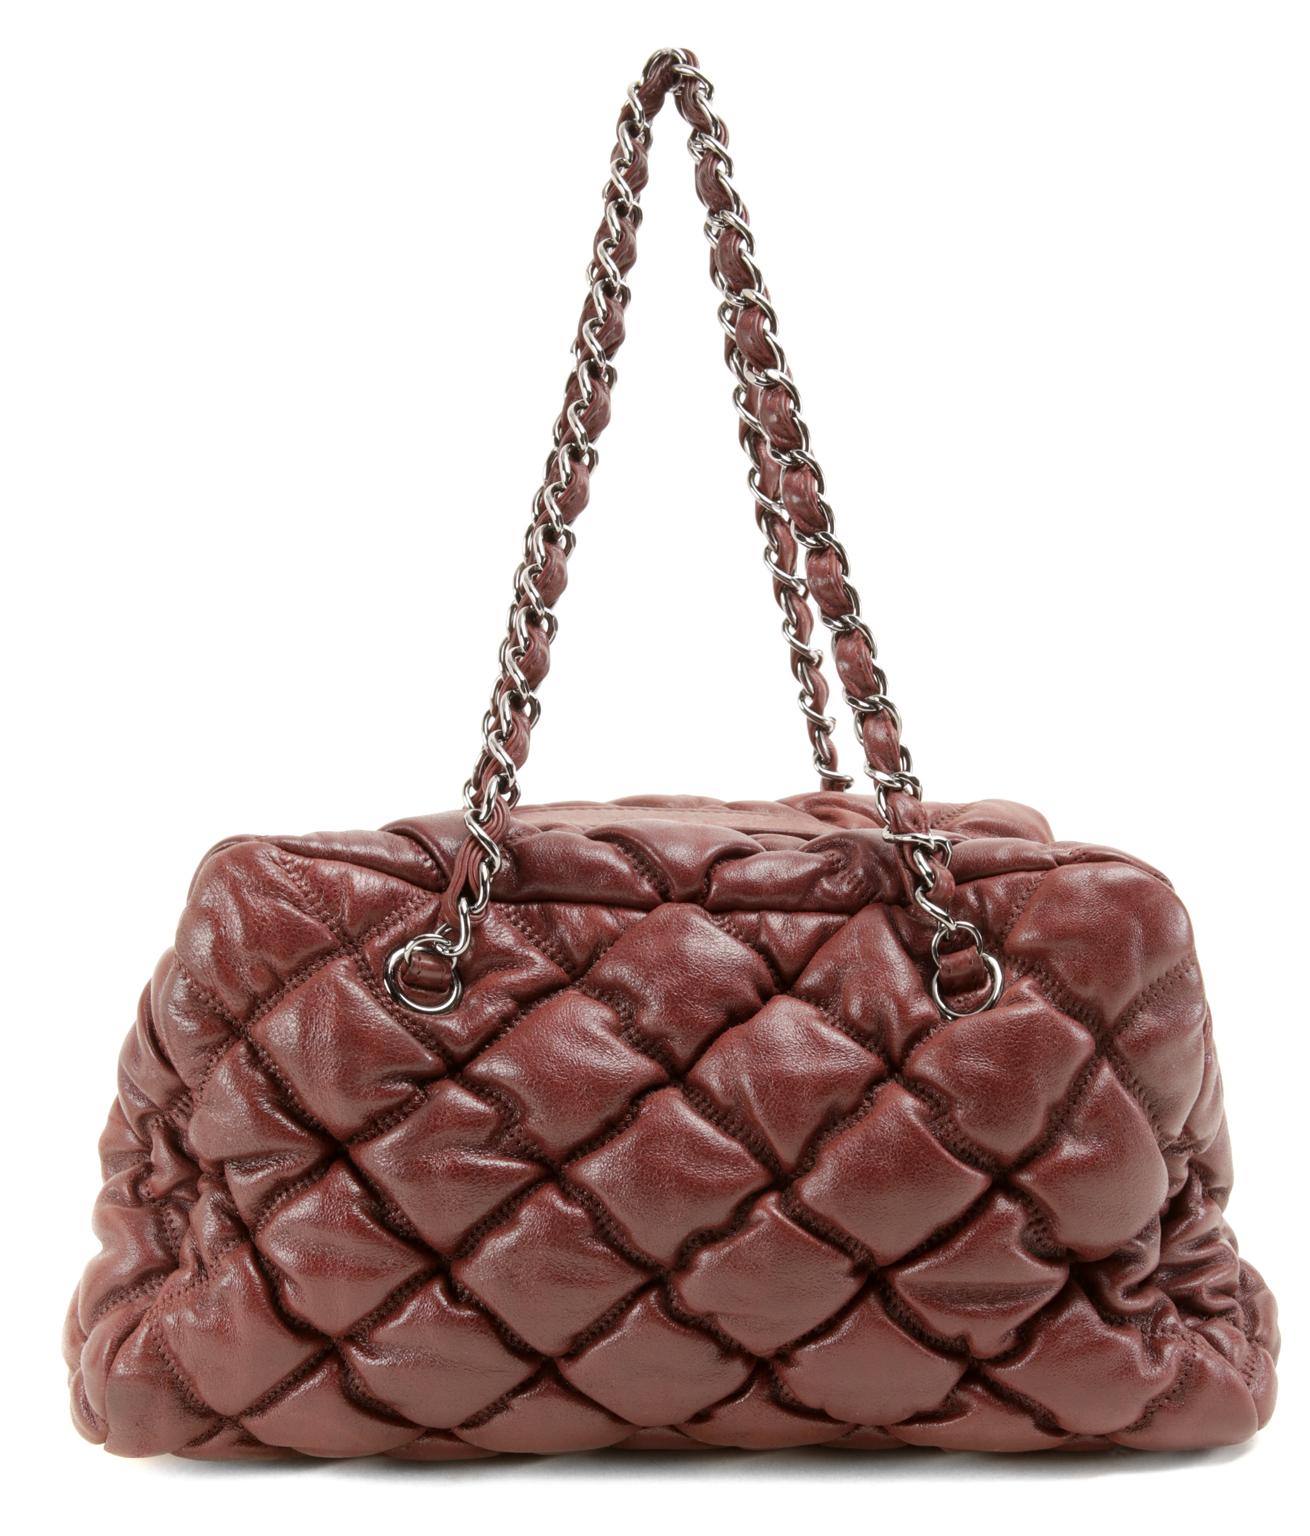 Chanel Wine Red Leather Bubble Bag- PRISTINE The striking color enhances the texture of the unique bubble quilting beautifully. Roomy but not unwieldy, this piece is perfect for every day enjoyment. Wine red leather is quilted in the extra puffy